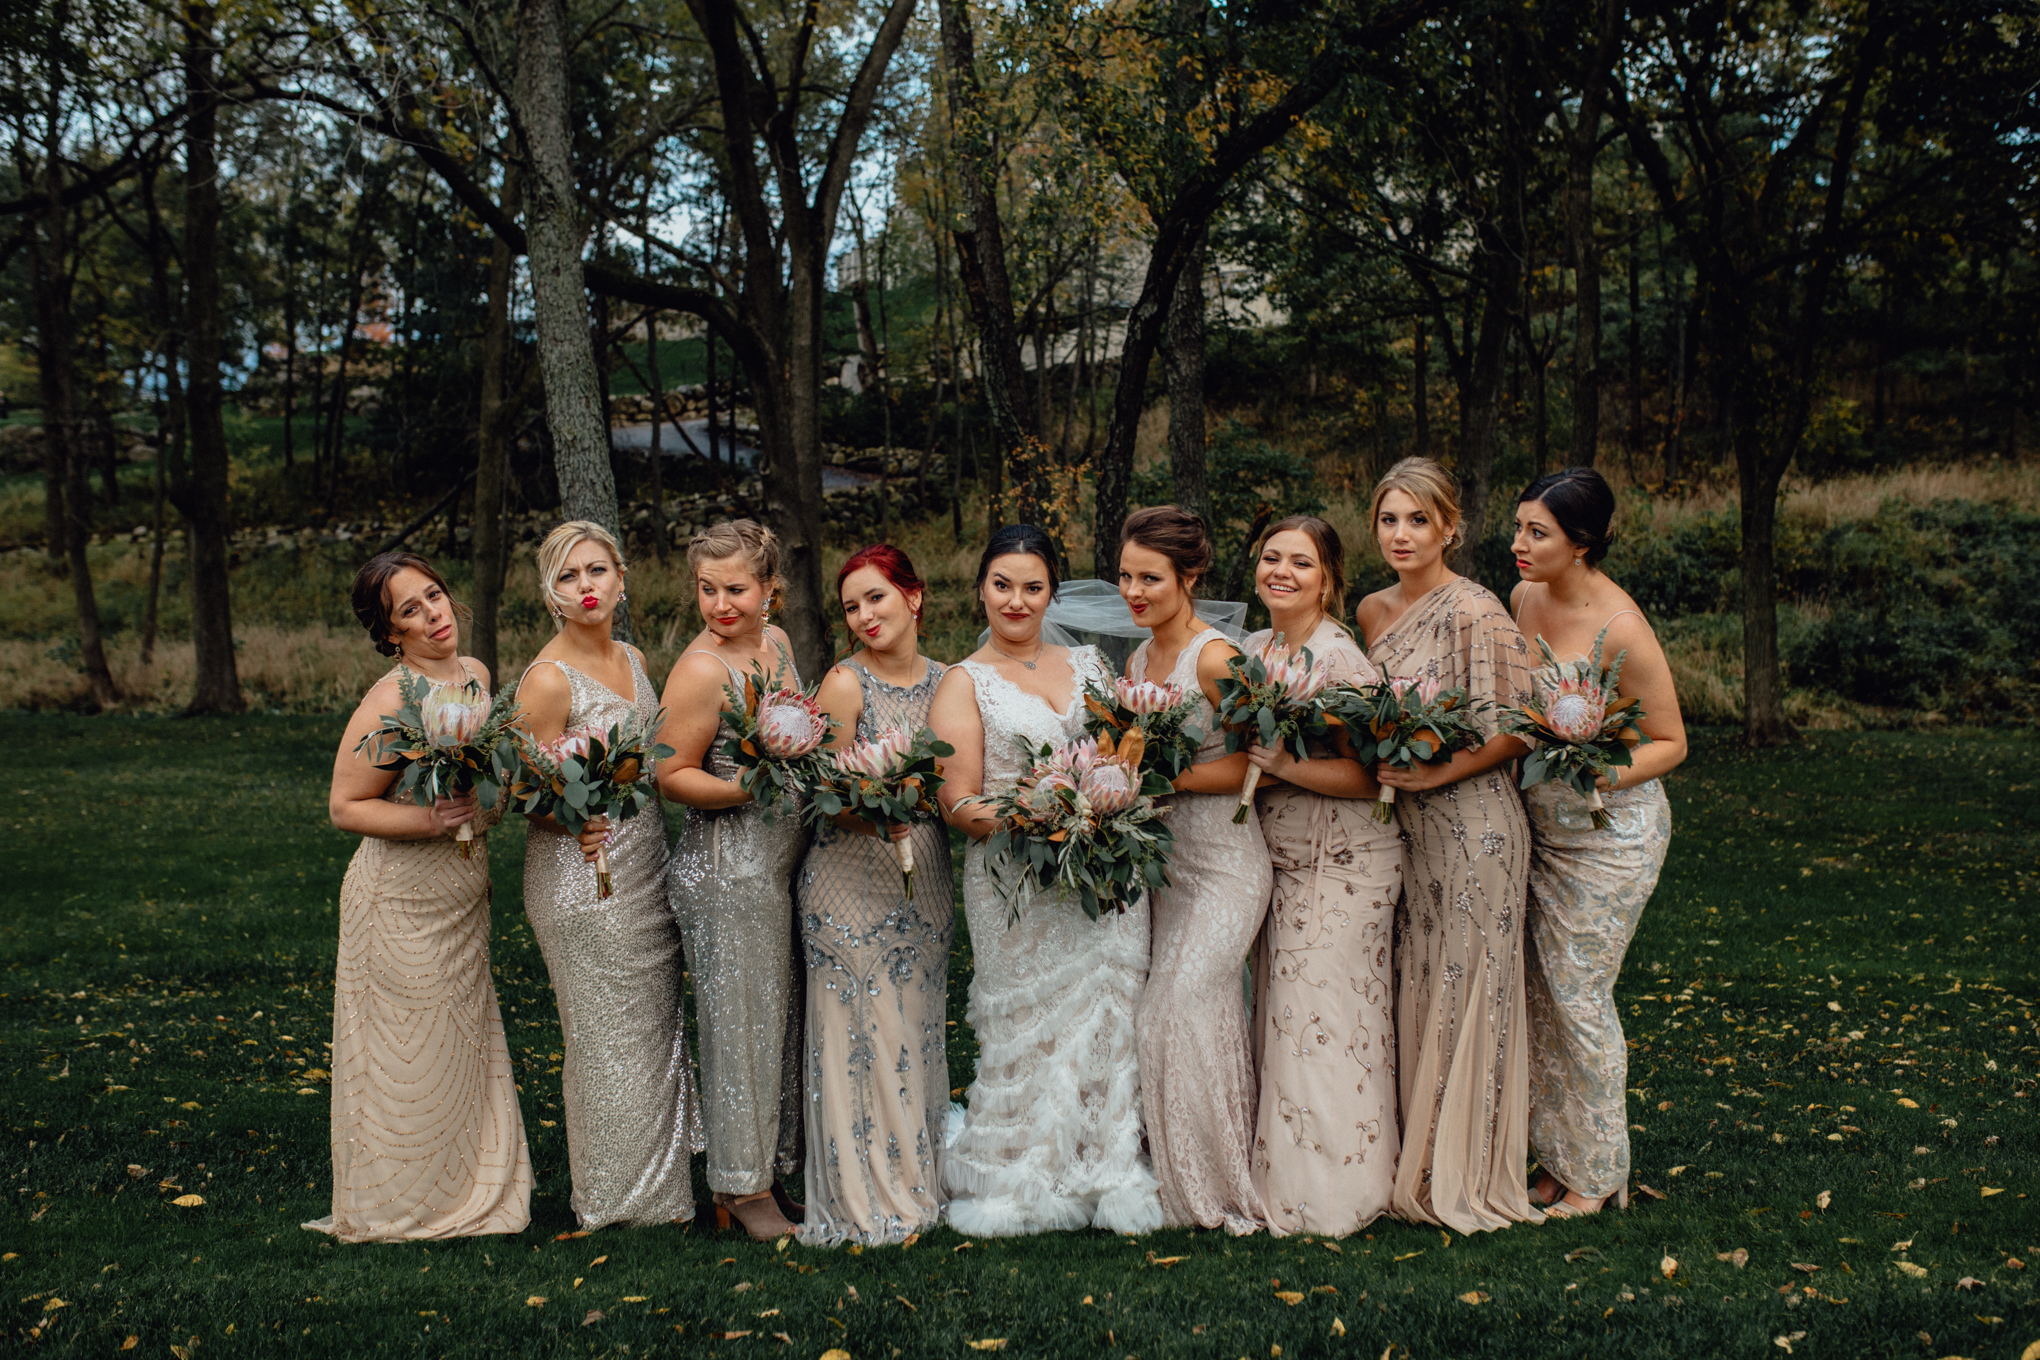  bridesmaids making kiss faces with bouquets in grass 